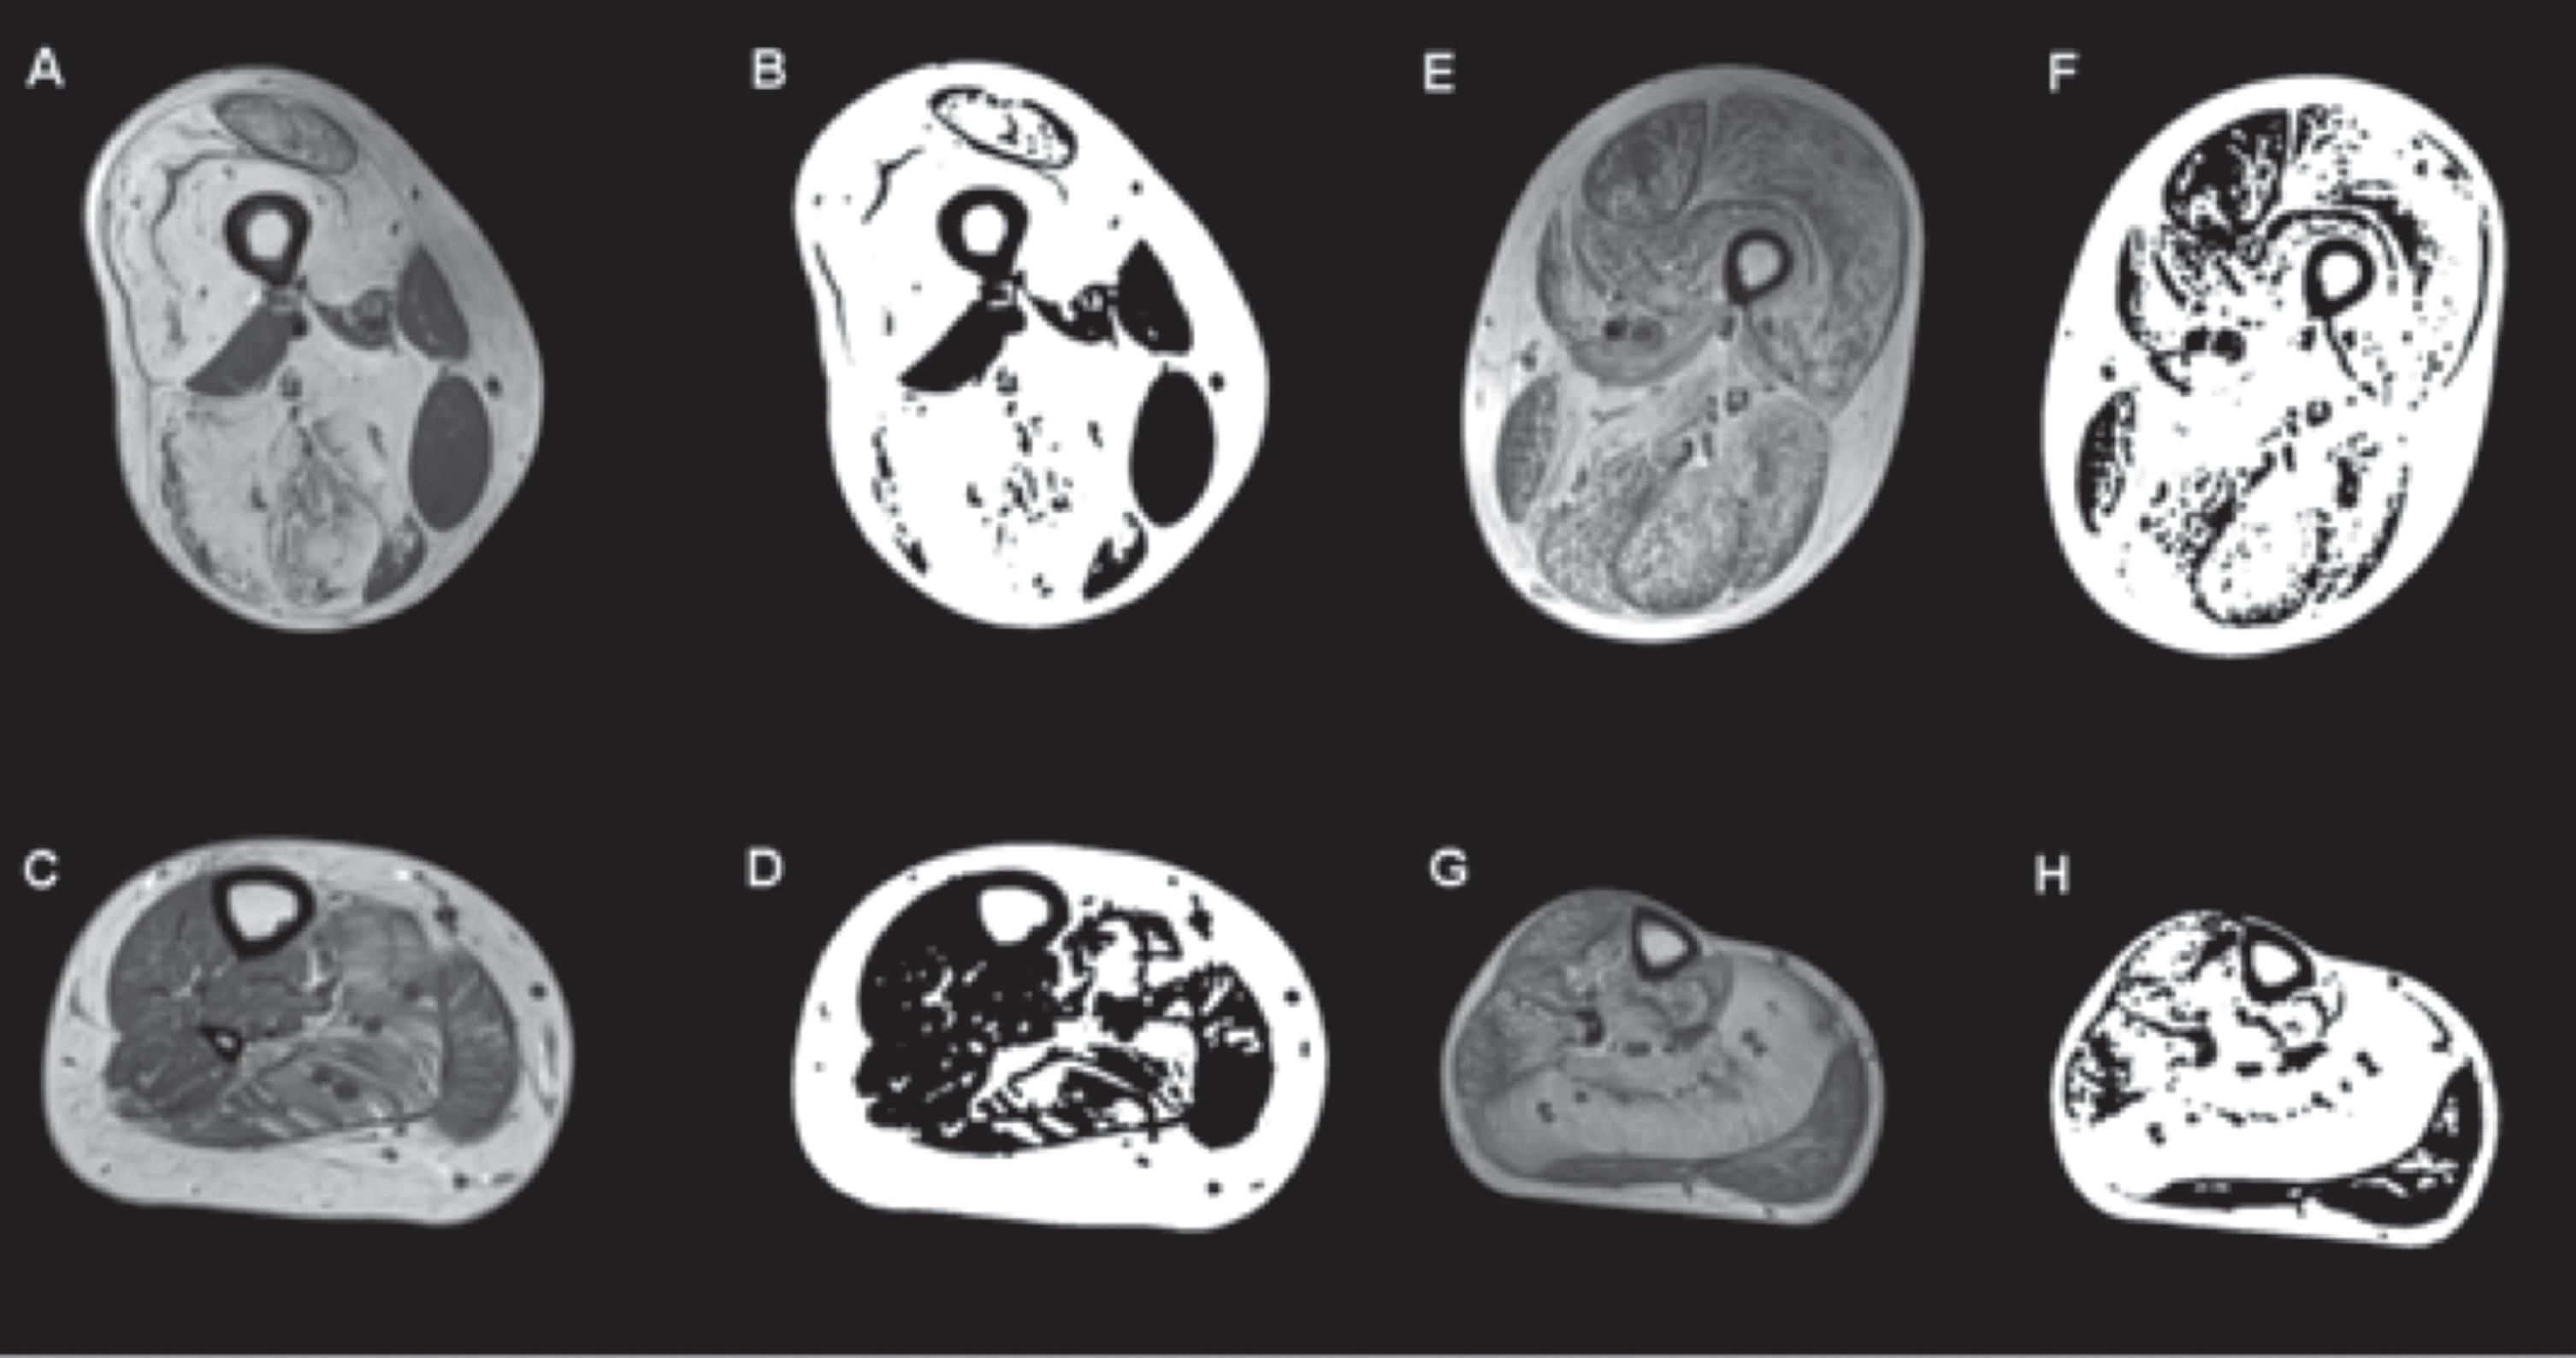 T1-weighted MRI and images generated using an ImageJ-derived quantification script showing selective muscle fatty infiltration in RYR1-RM. Transverse sections of the proximal thigh and lower leg in a dominantly inherited case (#11: A and C are the MR images of the upper and lower leg respectively, B and D are the quantification images generated by ImageJ script) and a recessive case (#8: E and G are the MR images of the upper and lower leg respectively, and F and H are their quantification images). In the dominant case, there is relative sparing of rectus femoris, adductor longus, and hypertrophied gracilis in the upper thigh, and in the lower leg the soleus and gastrocnemius lateralis are the most affected while the tibialis anterior, peroneal group, and gastrocnemius medialis are relatively spared. In the recessive case, all muscle groups are affected in the upper leg, including the tibialis anterior and peroneal group in the lower leg, with the soleus being the most affected. No statistically significant difference in intramuscular fatty infiltration was observed between dominant and recessive cases.